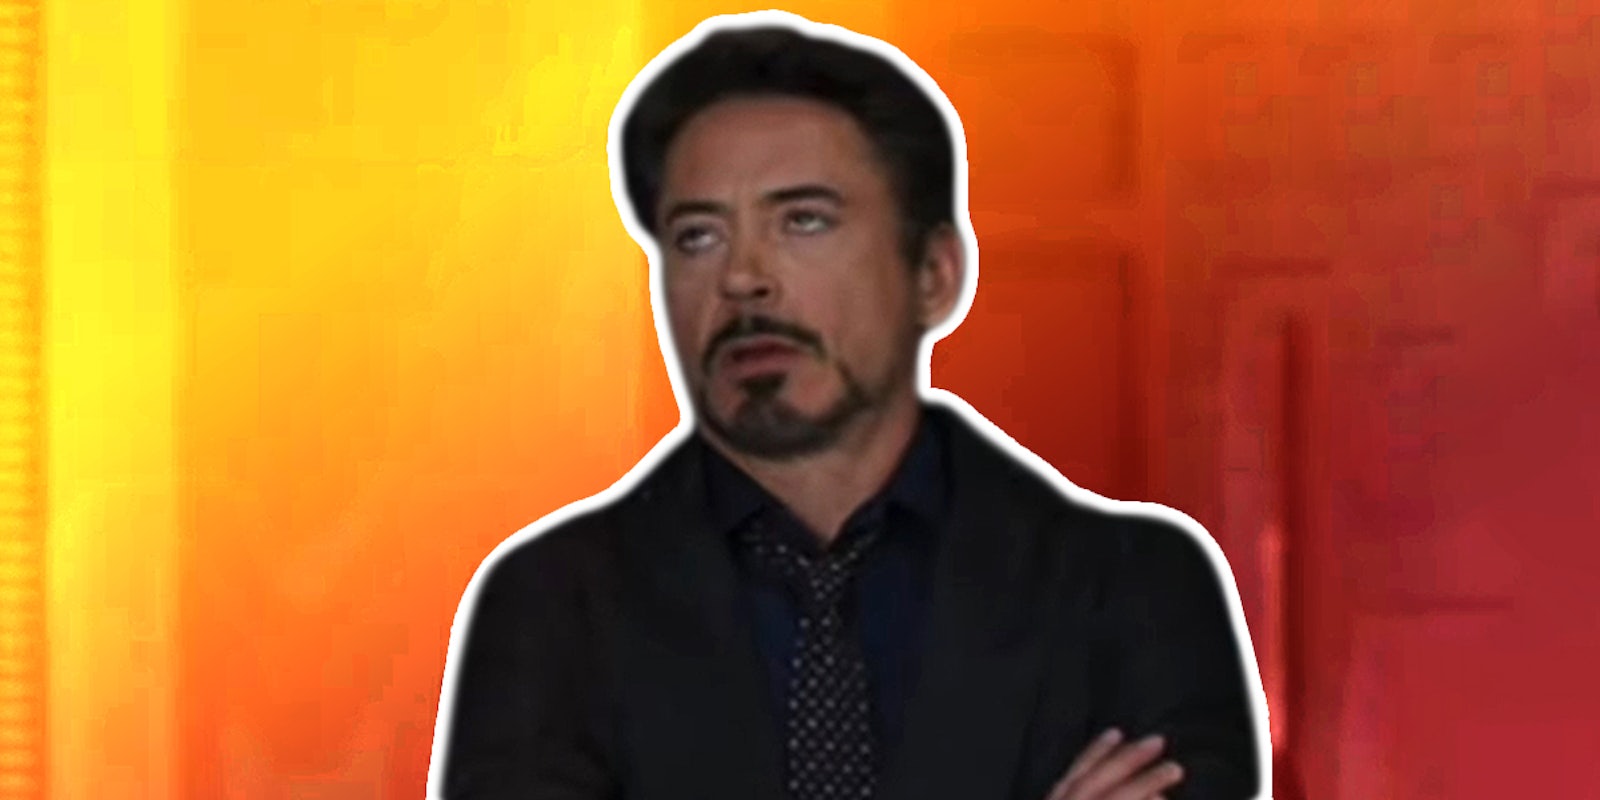 Robert Downey Jr. as Tony Stark Avengers in front of yellow to red diagonal gradient background